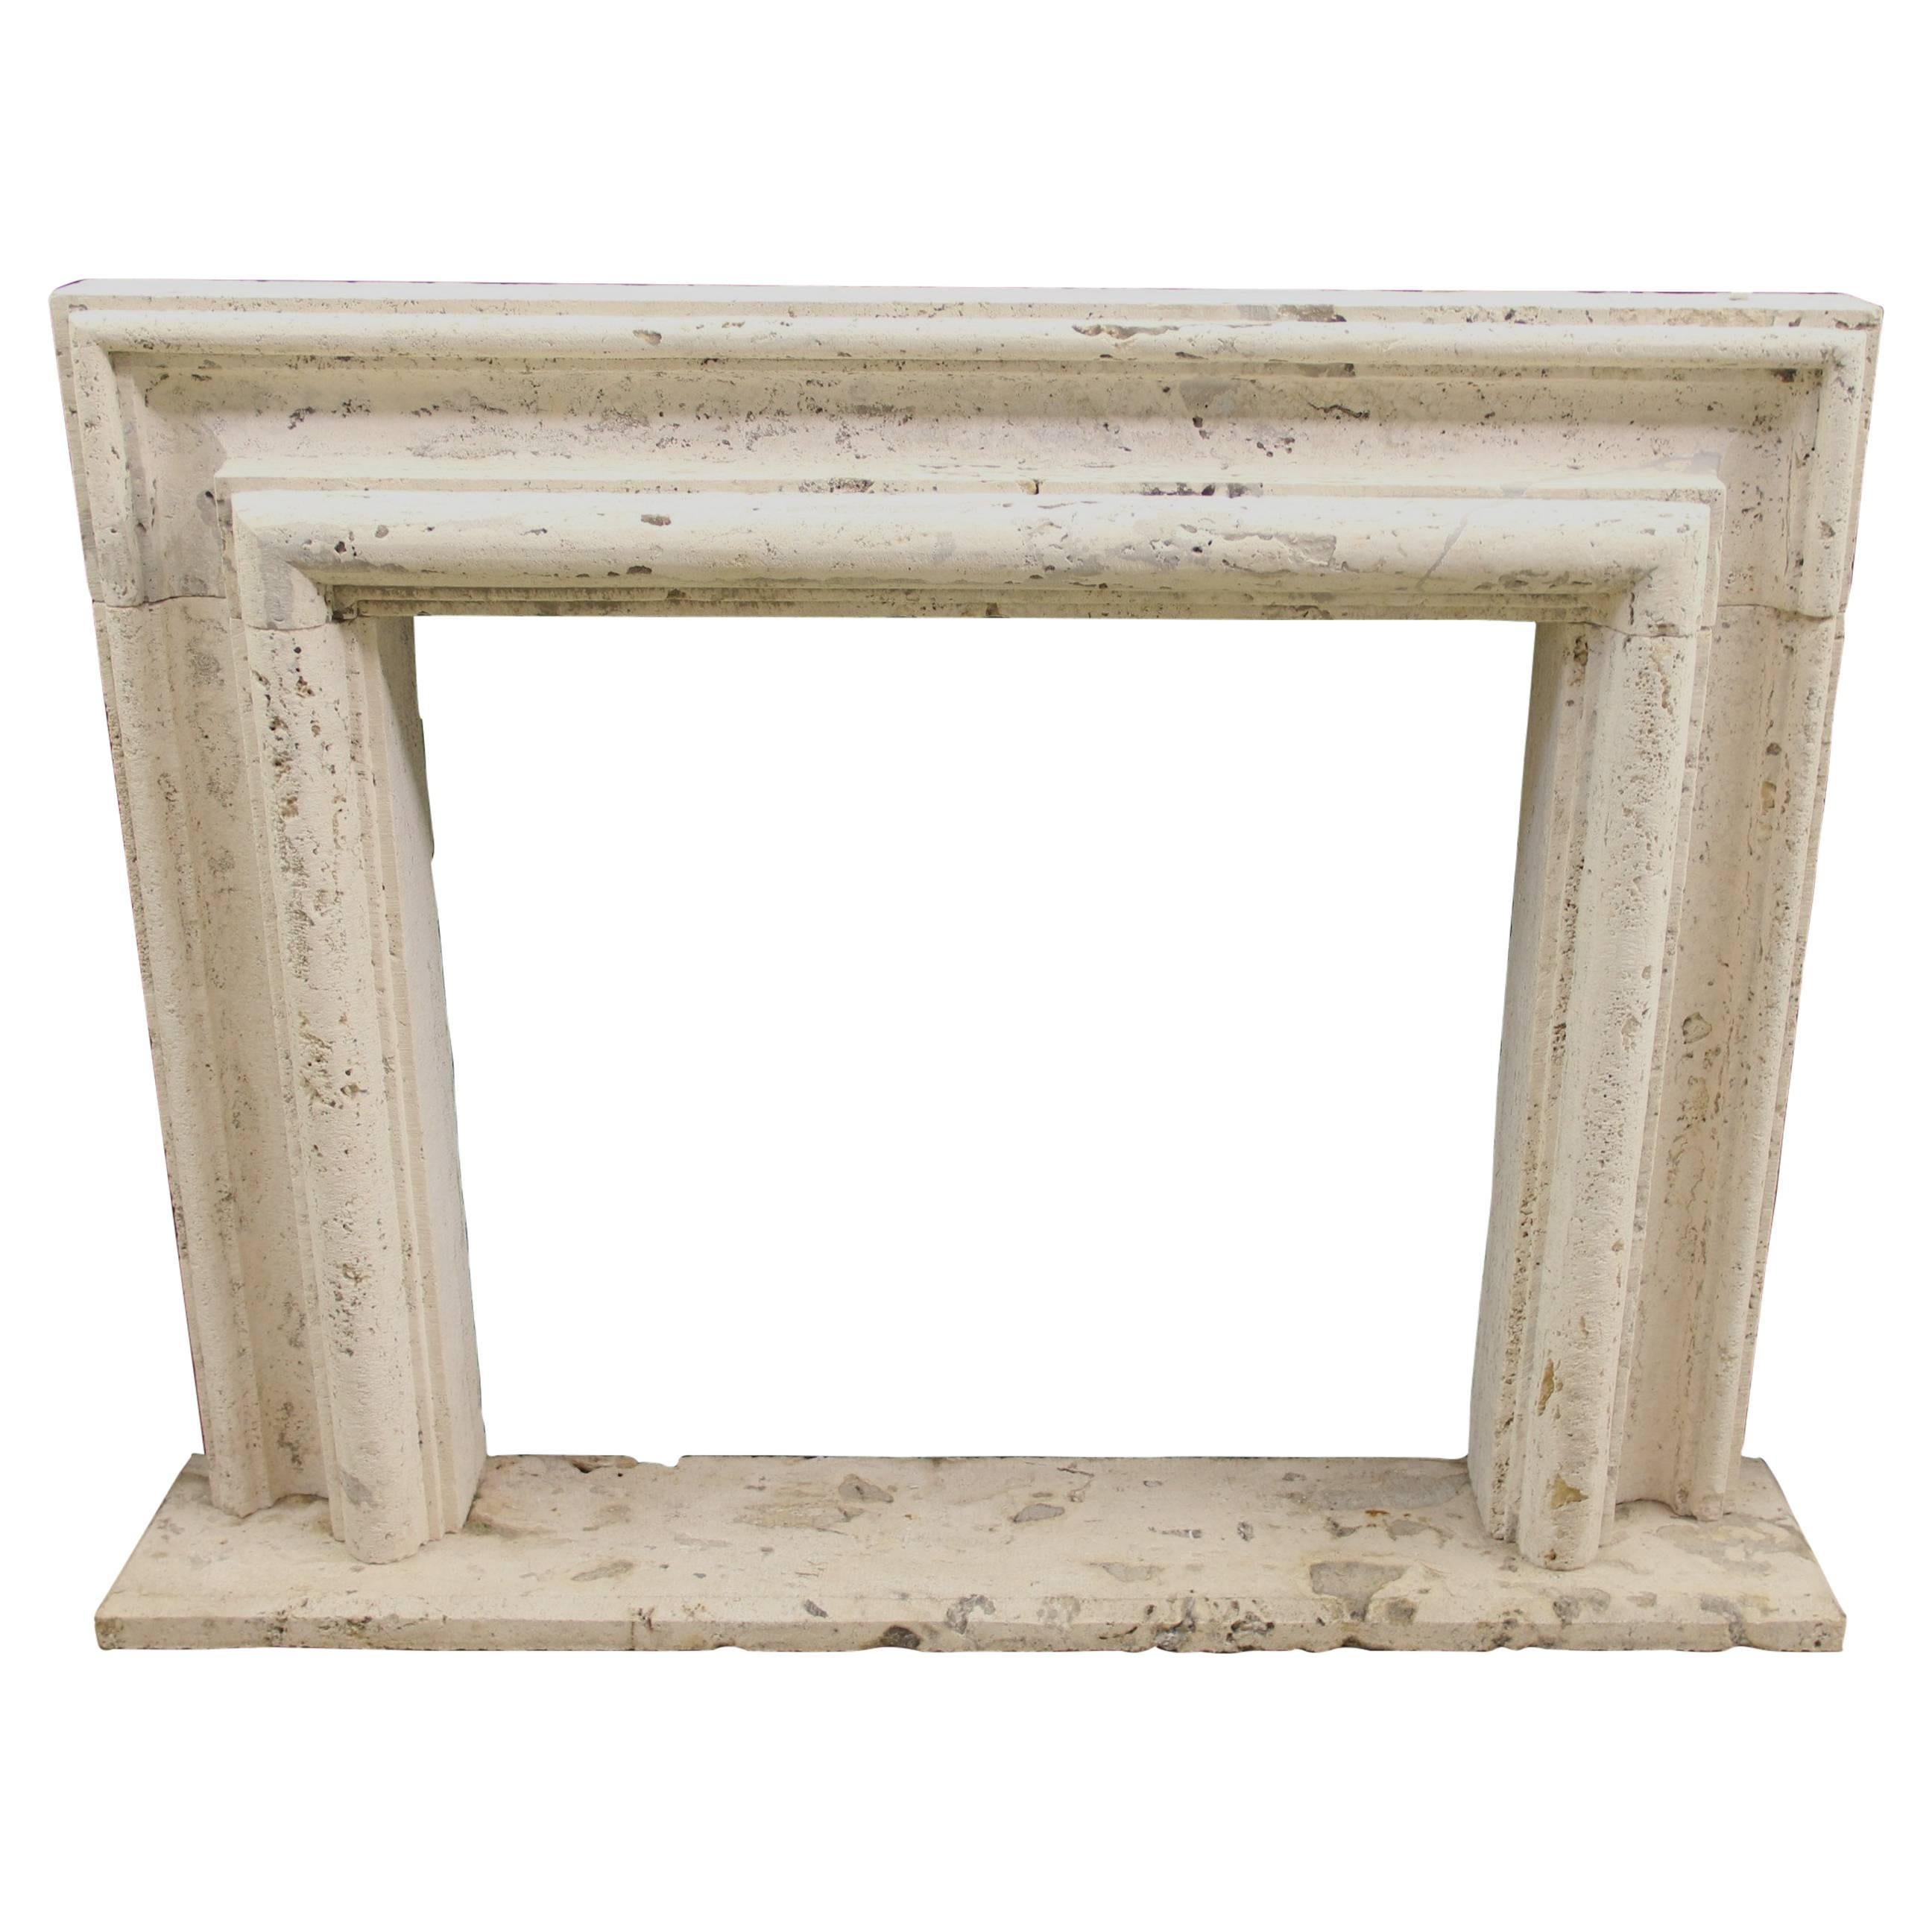 New Made Italian Fireplace in Travertine, Baroque Style, 19th Century For Sale